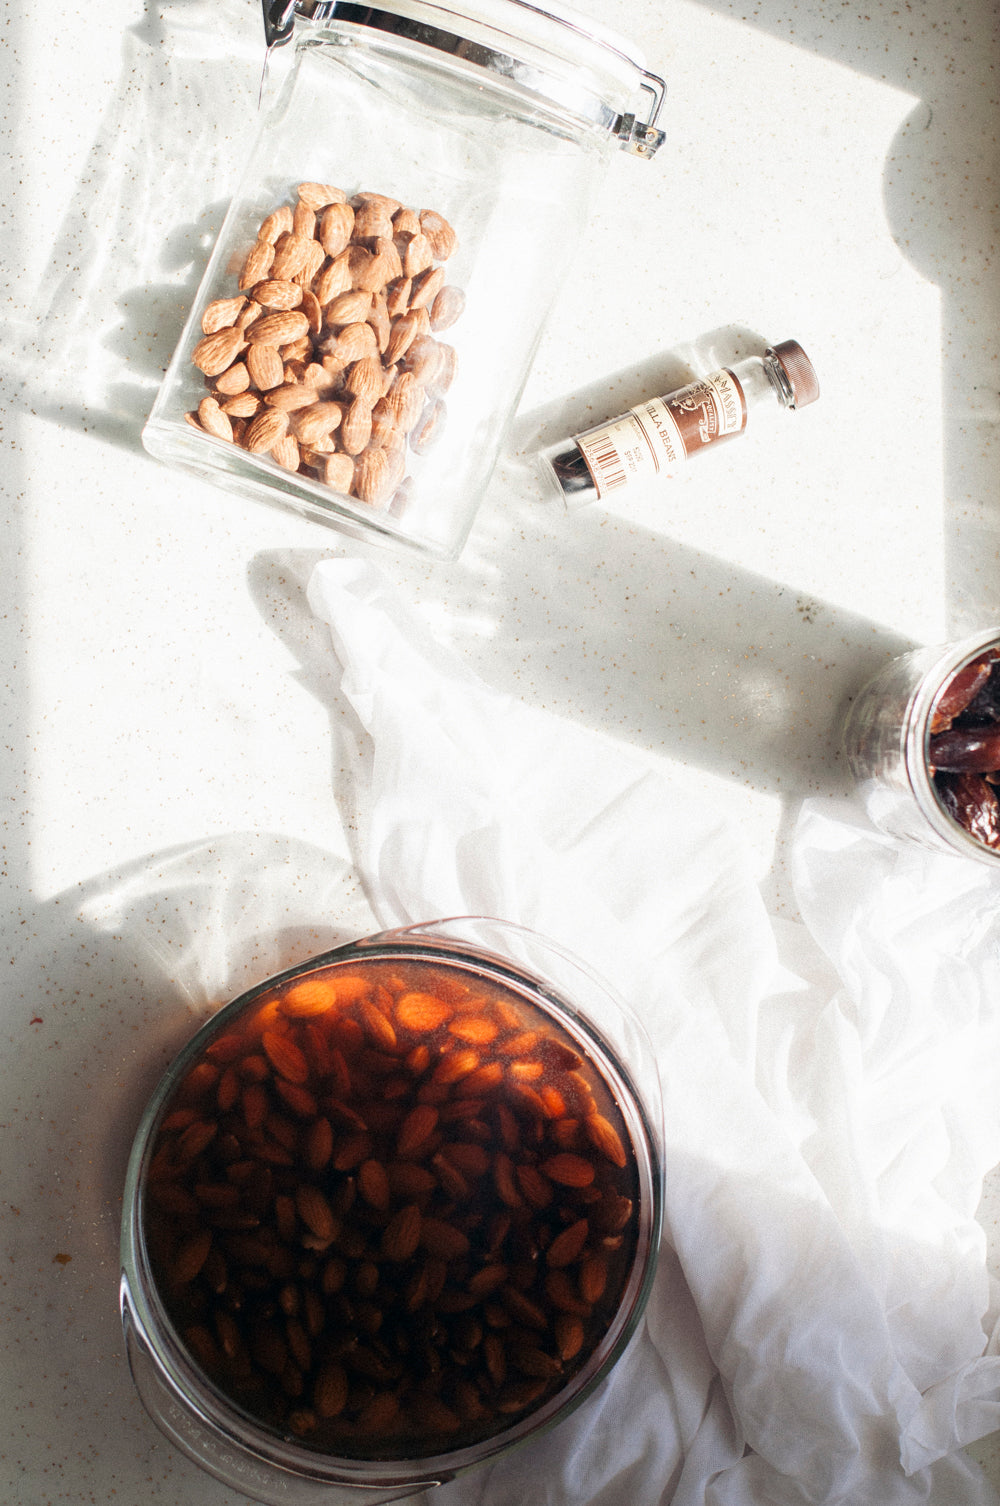 How To Make Almond Milk From Scratch